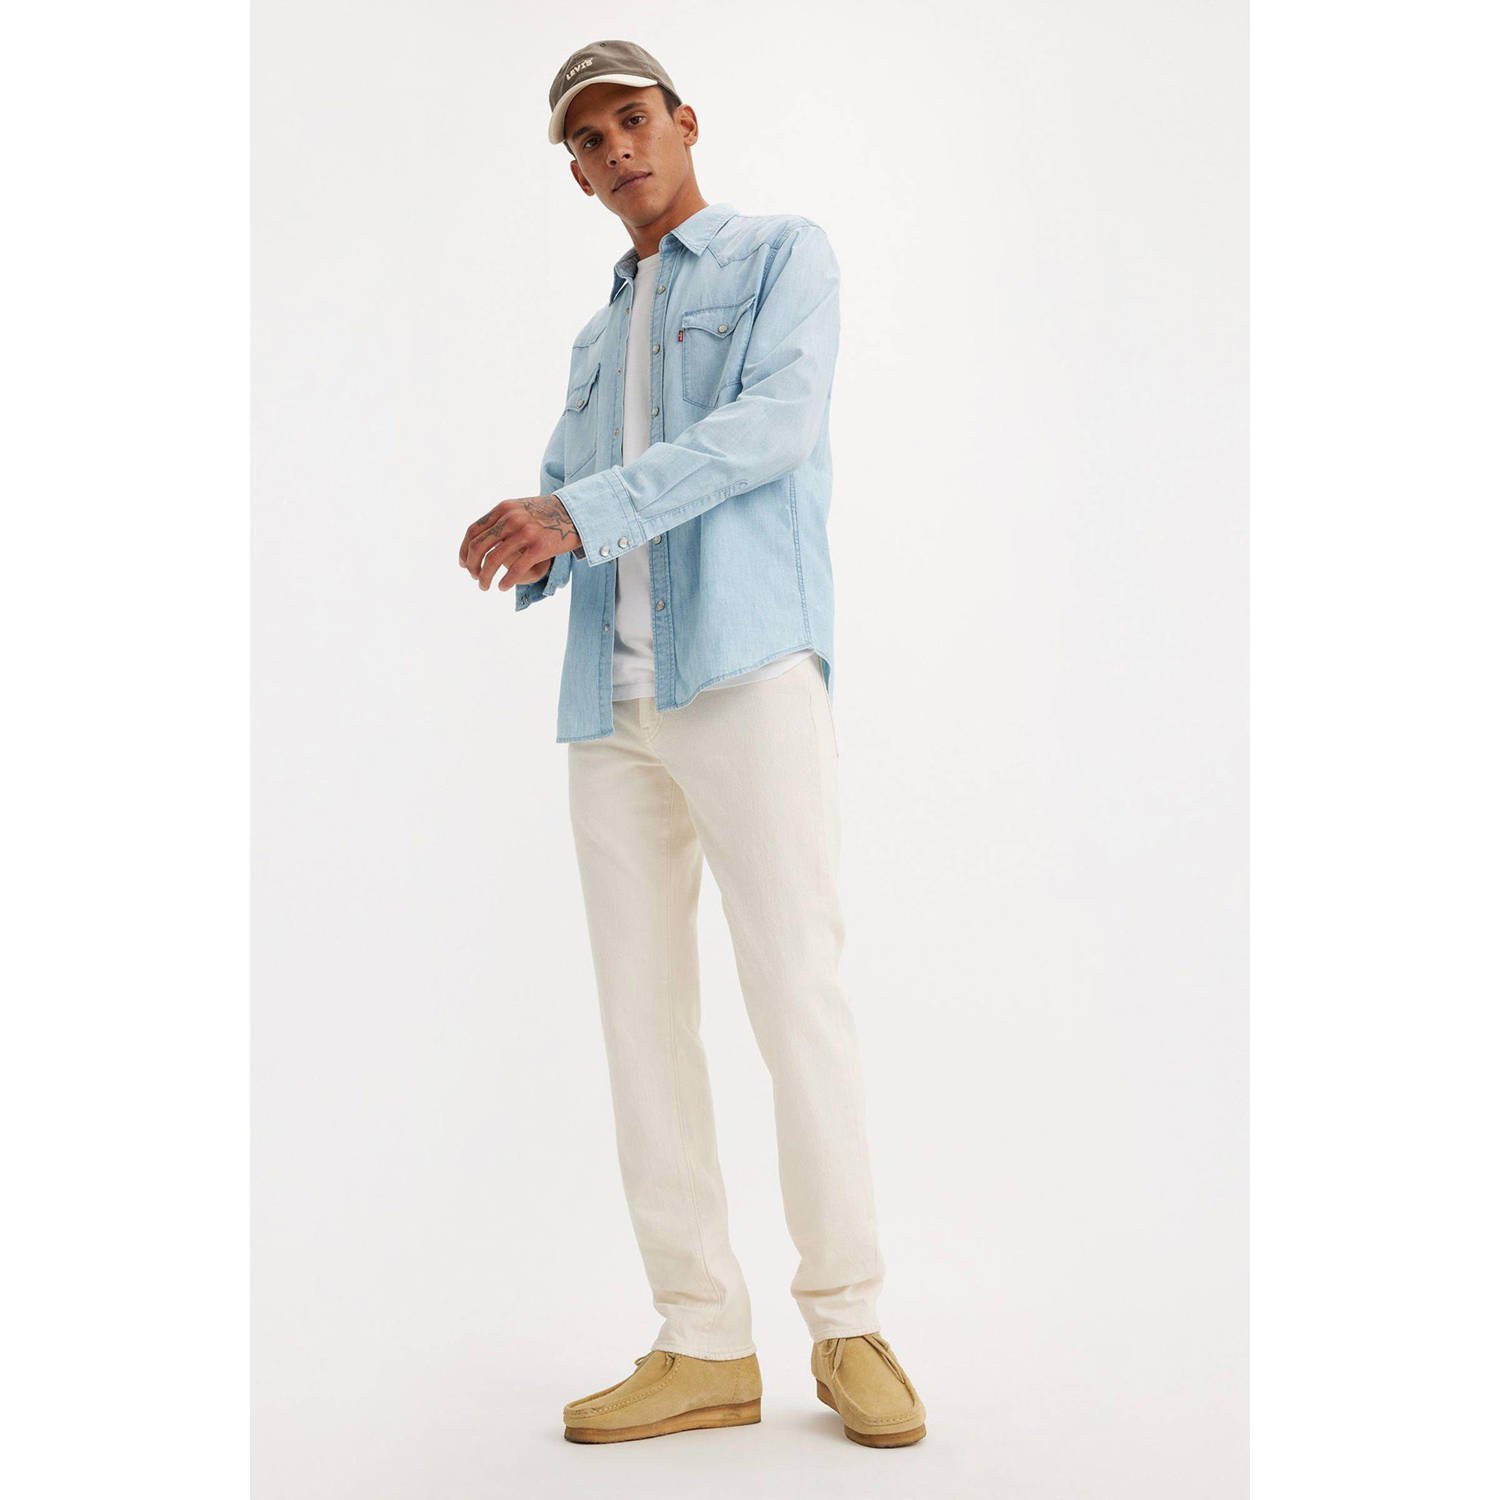 Levi's 511 slim fit jeans why so frosty